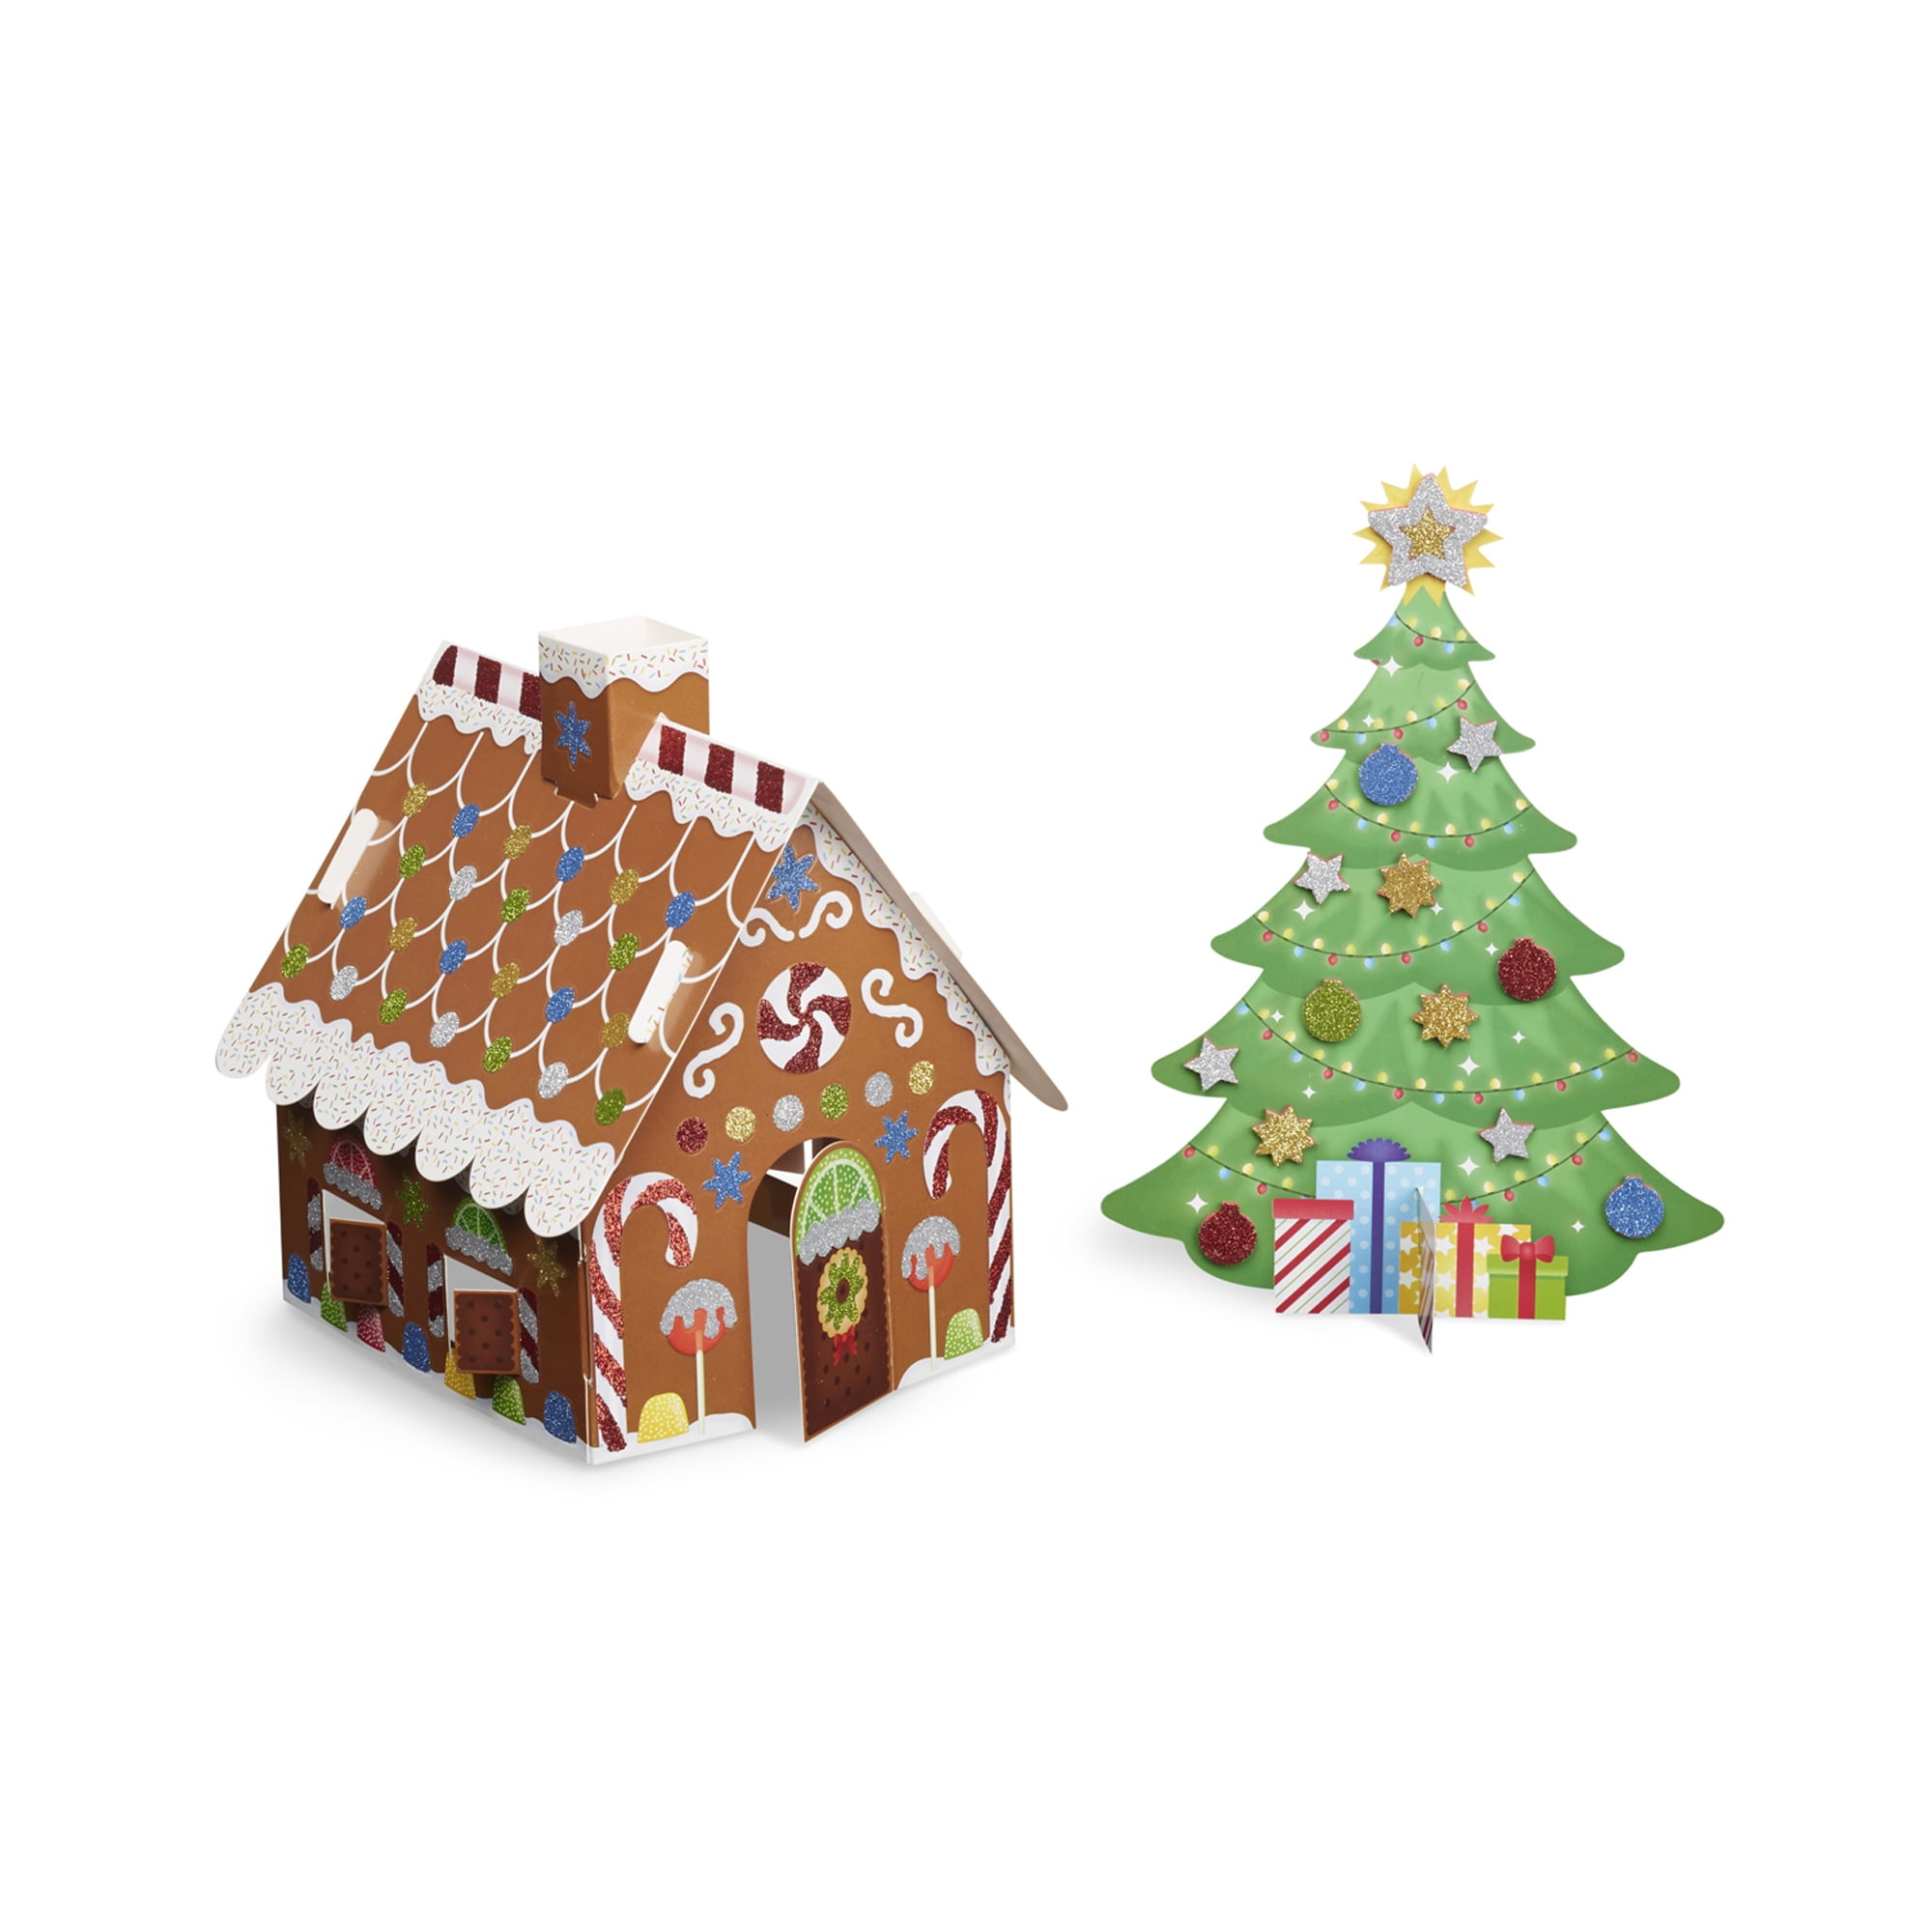 2-Pack Melissa & Doug Decorate-Your-Own Christmas Ornaments